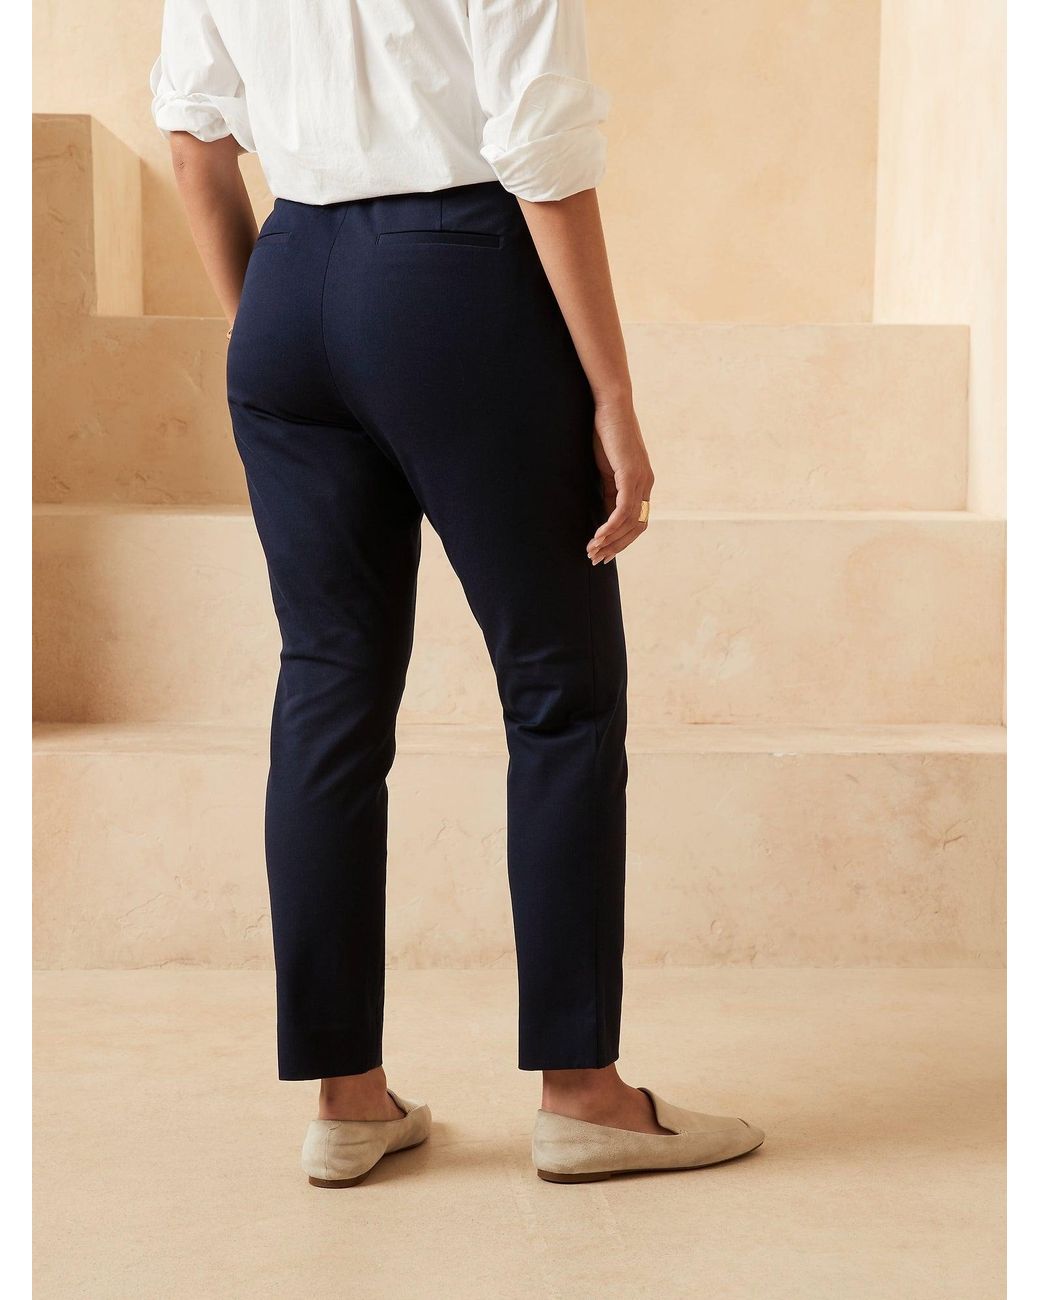 Review: Banana Republic Sloan Fit Slim Ankle Pants in Navy